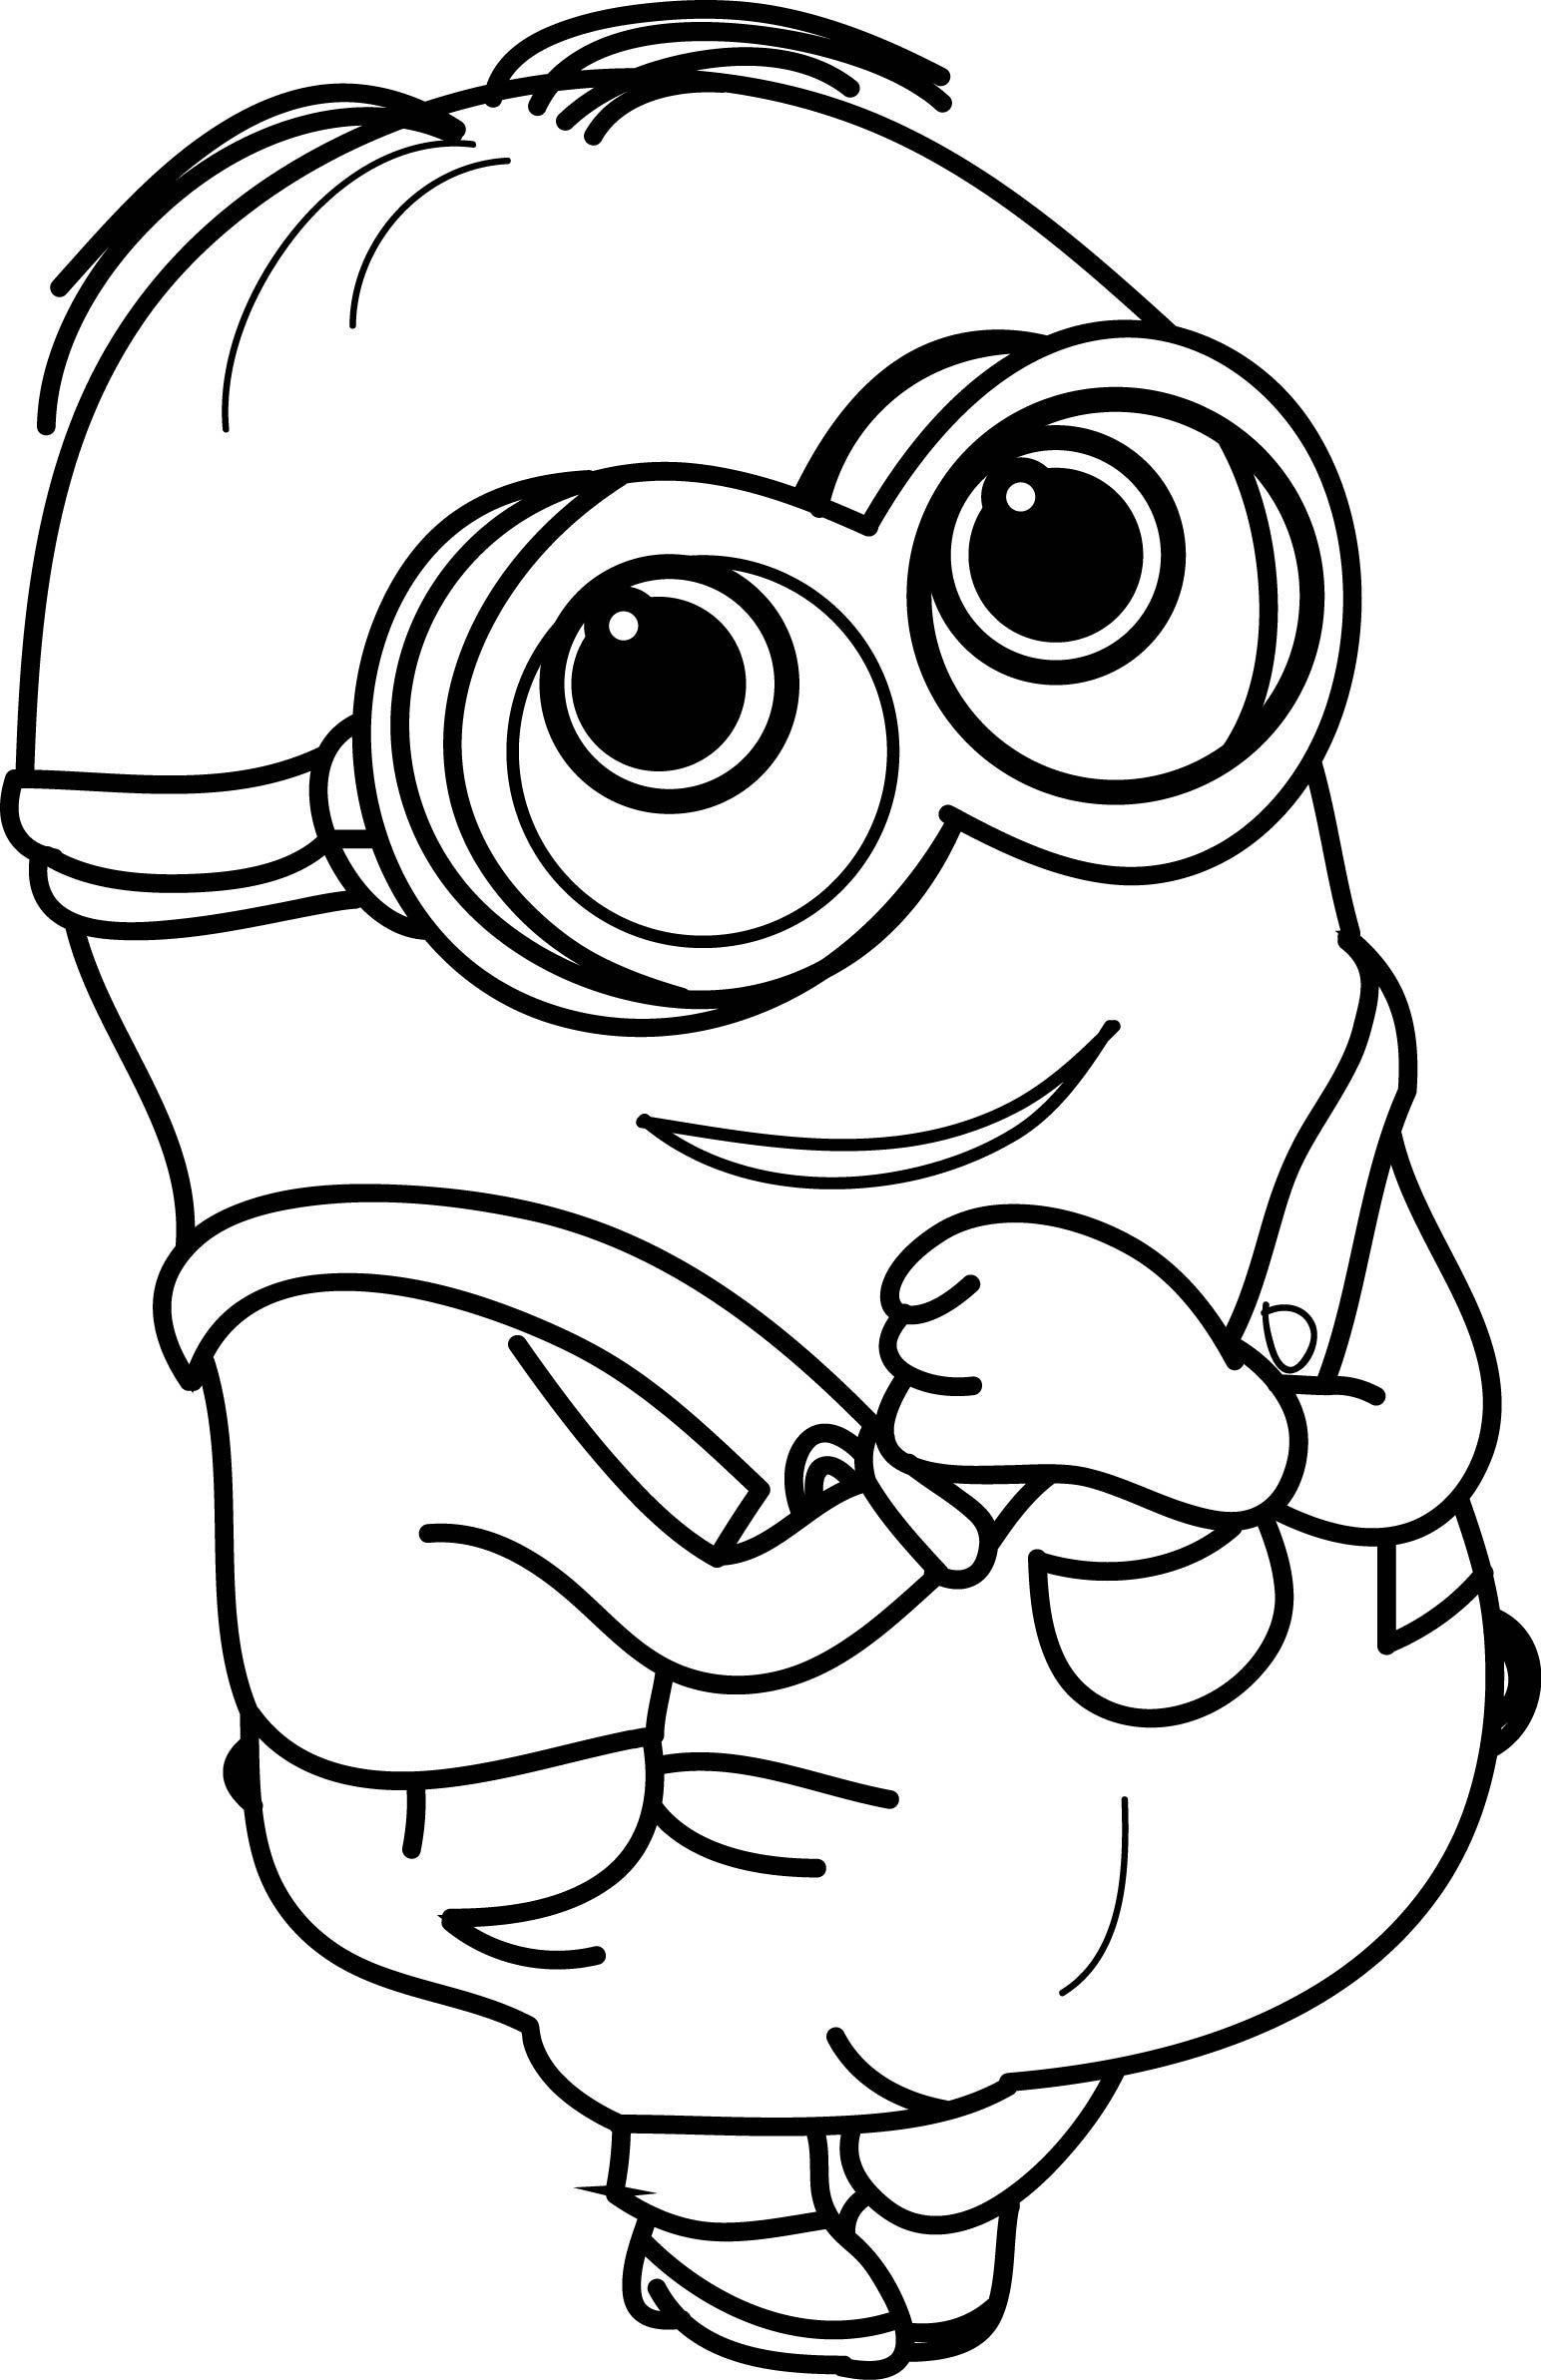 coloring pictures of minions minion very cute coloring page minion coloring pages pictures minions coloring of 